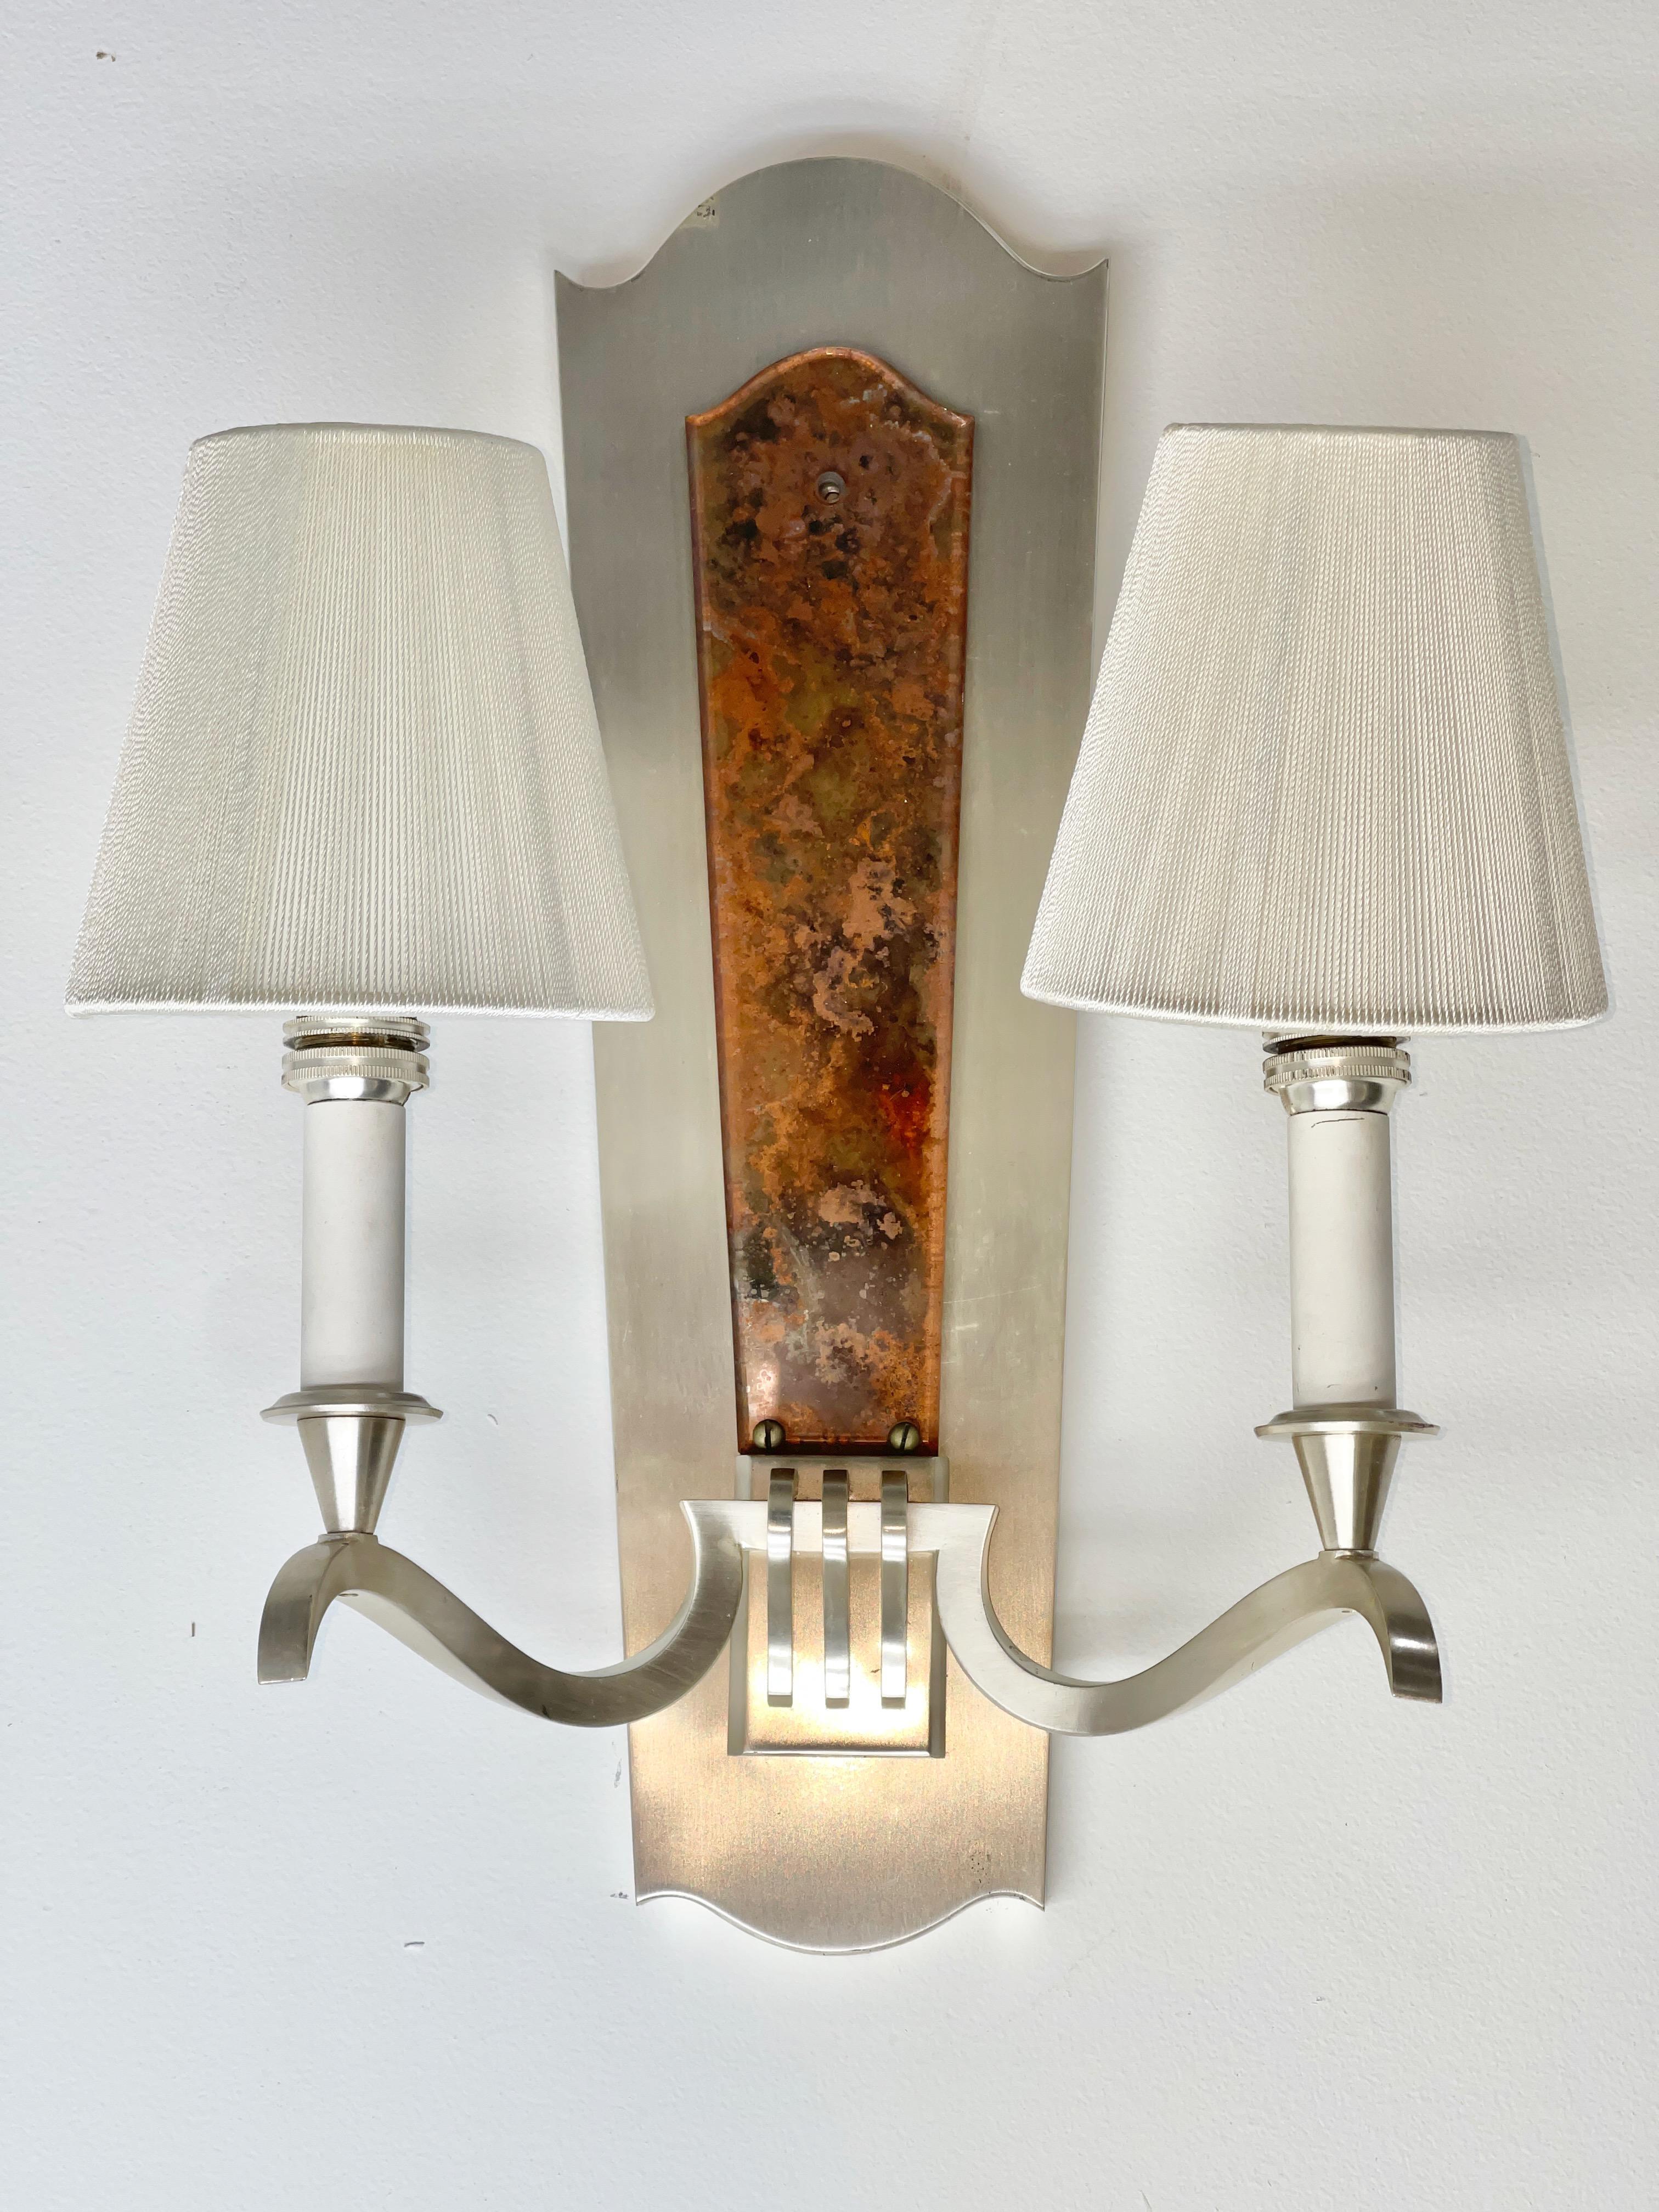 Pair of Genet et Michon Sconces in Brushed Nickel and Eglomise In Good Condition For Sale In Hanover, MA